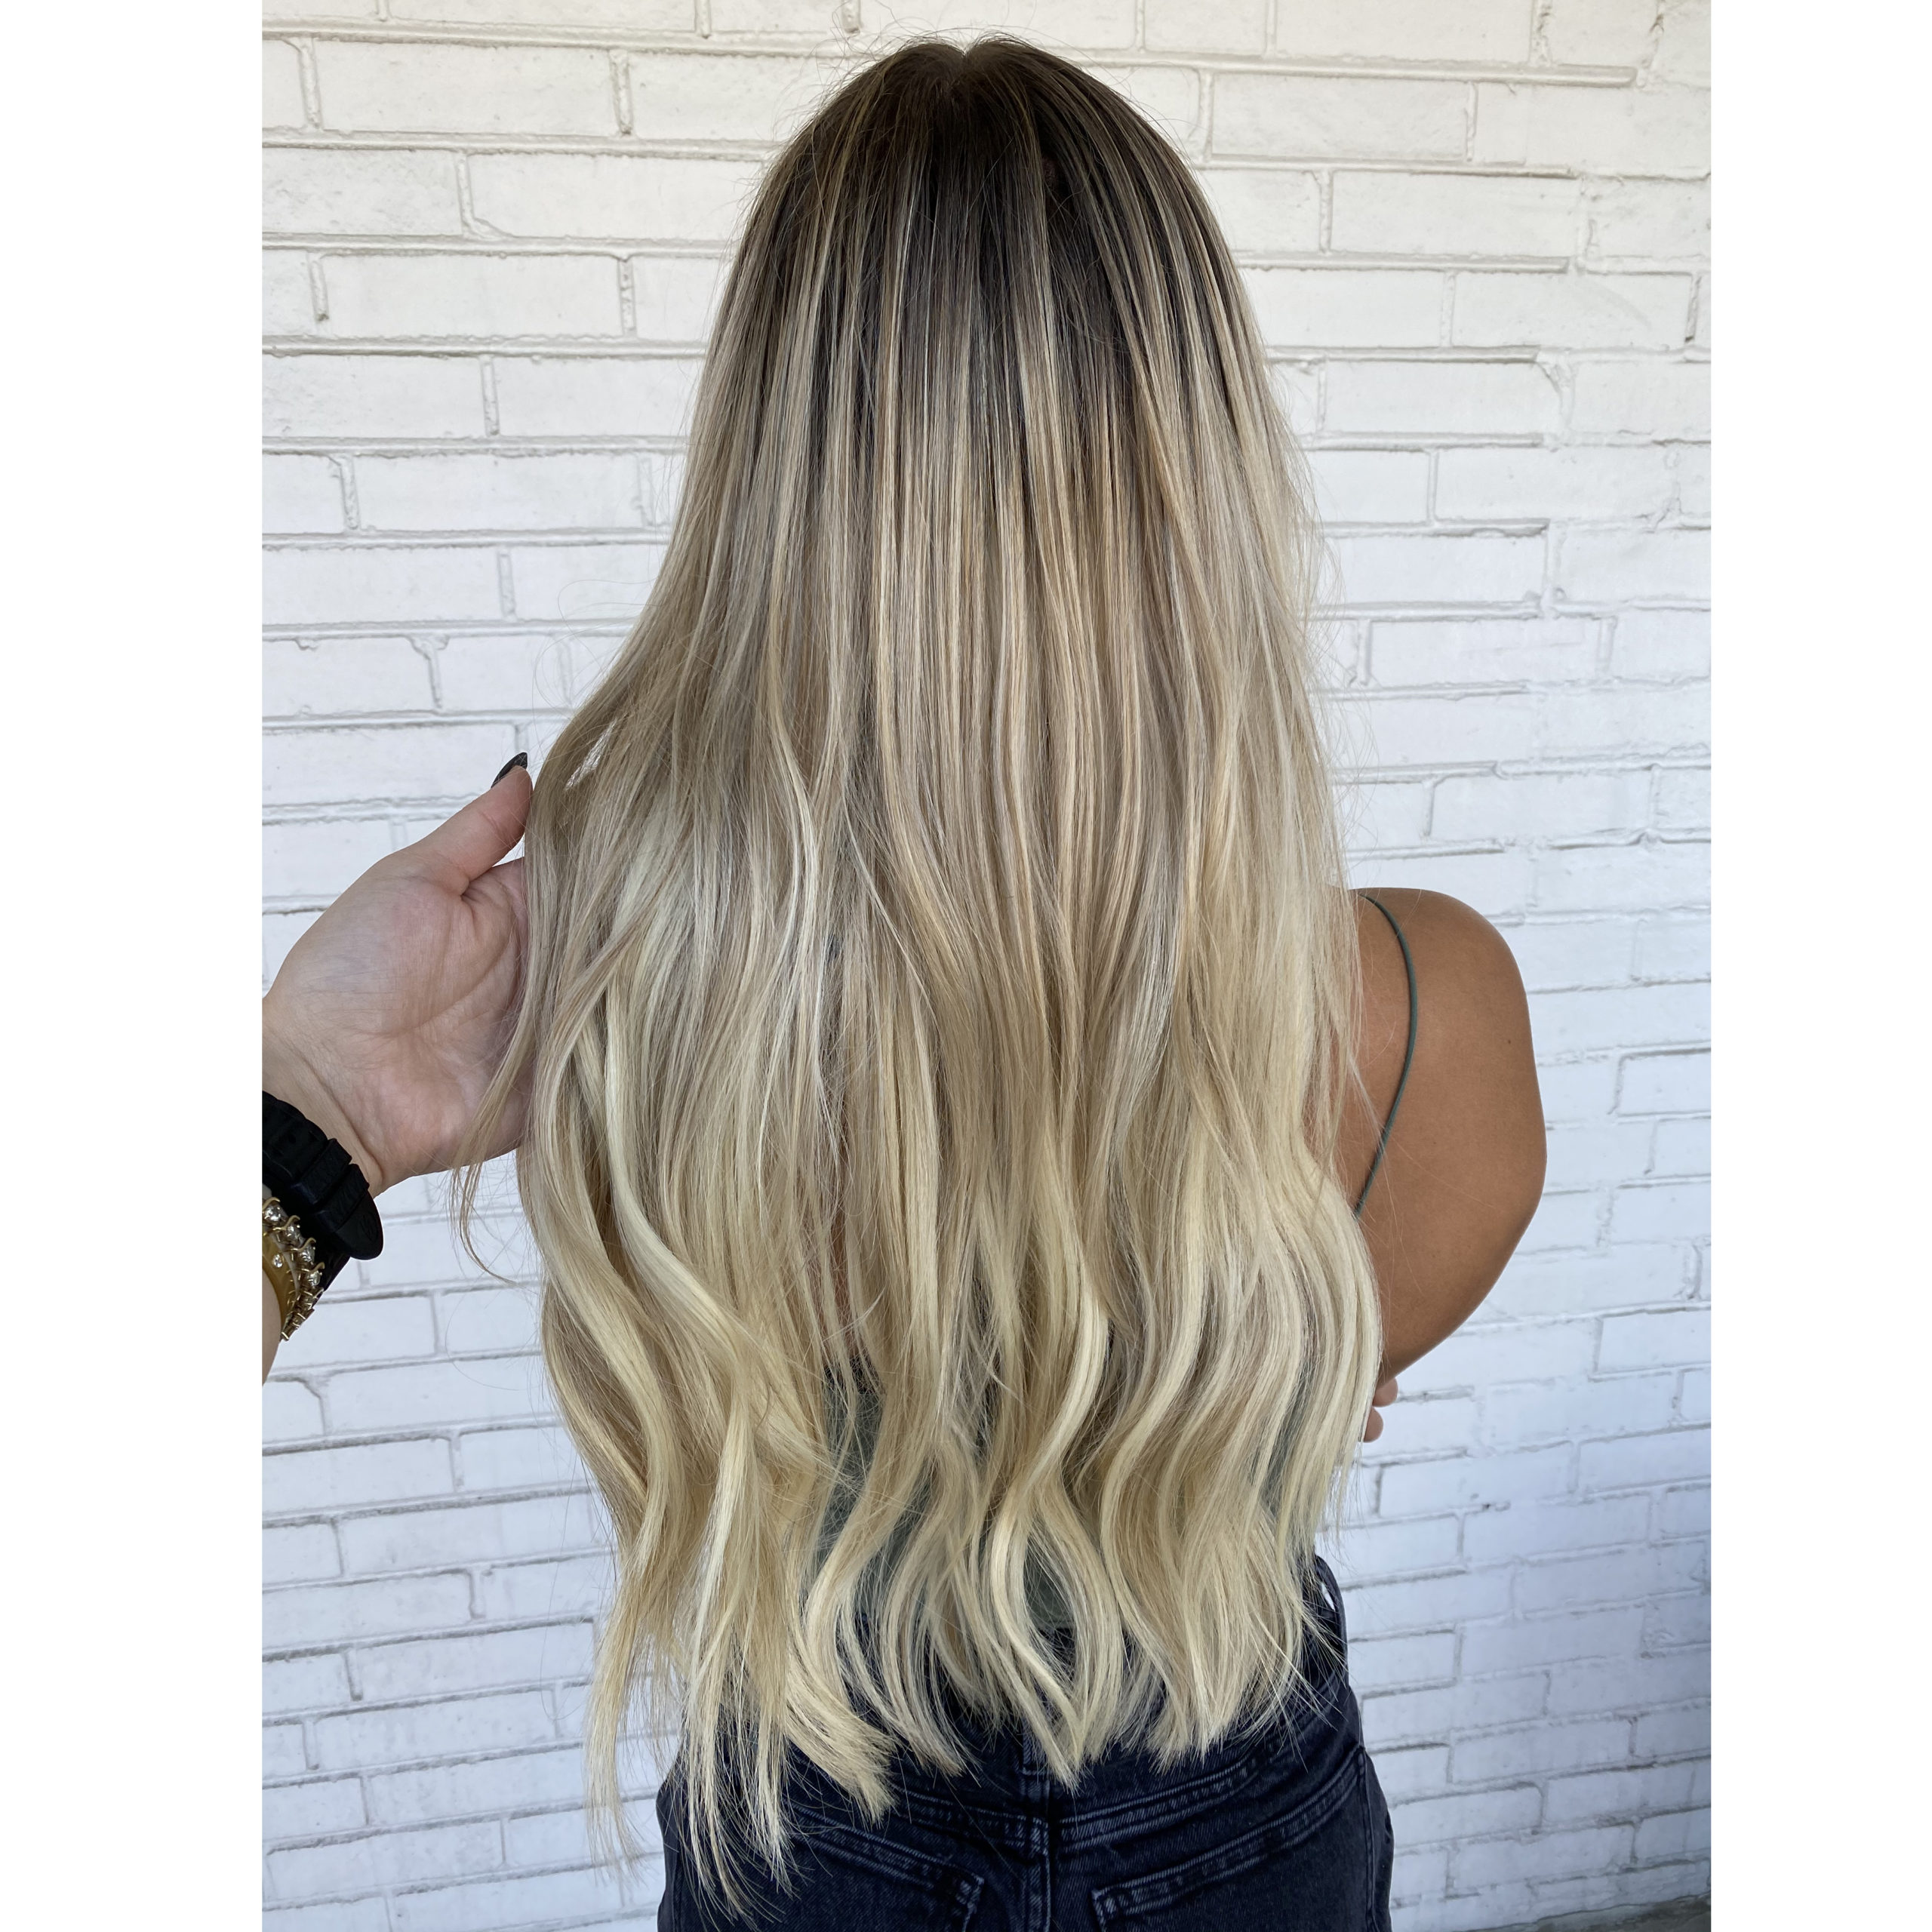 How To Choose The Right Kind Of Extensions For You